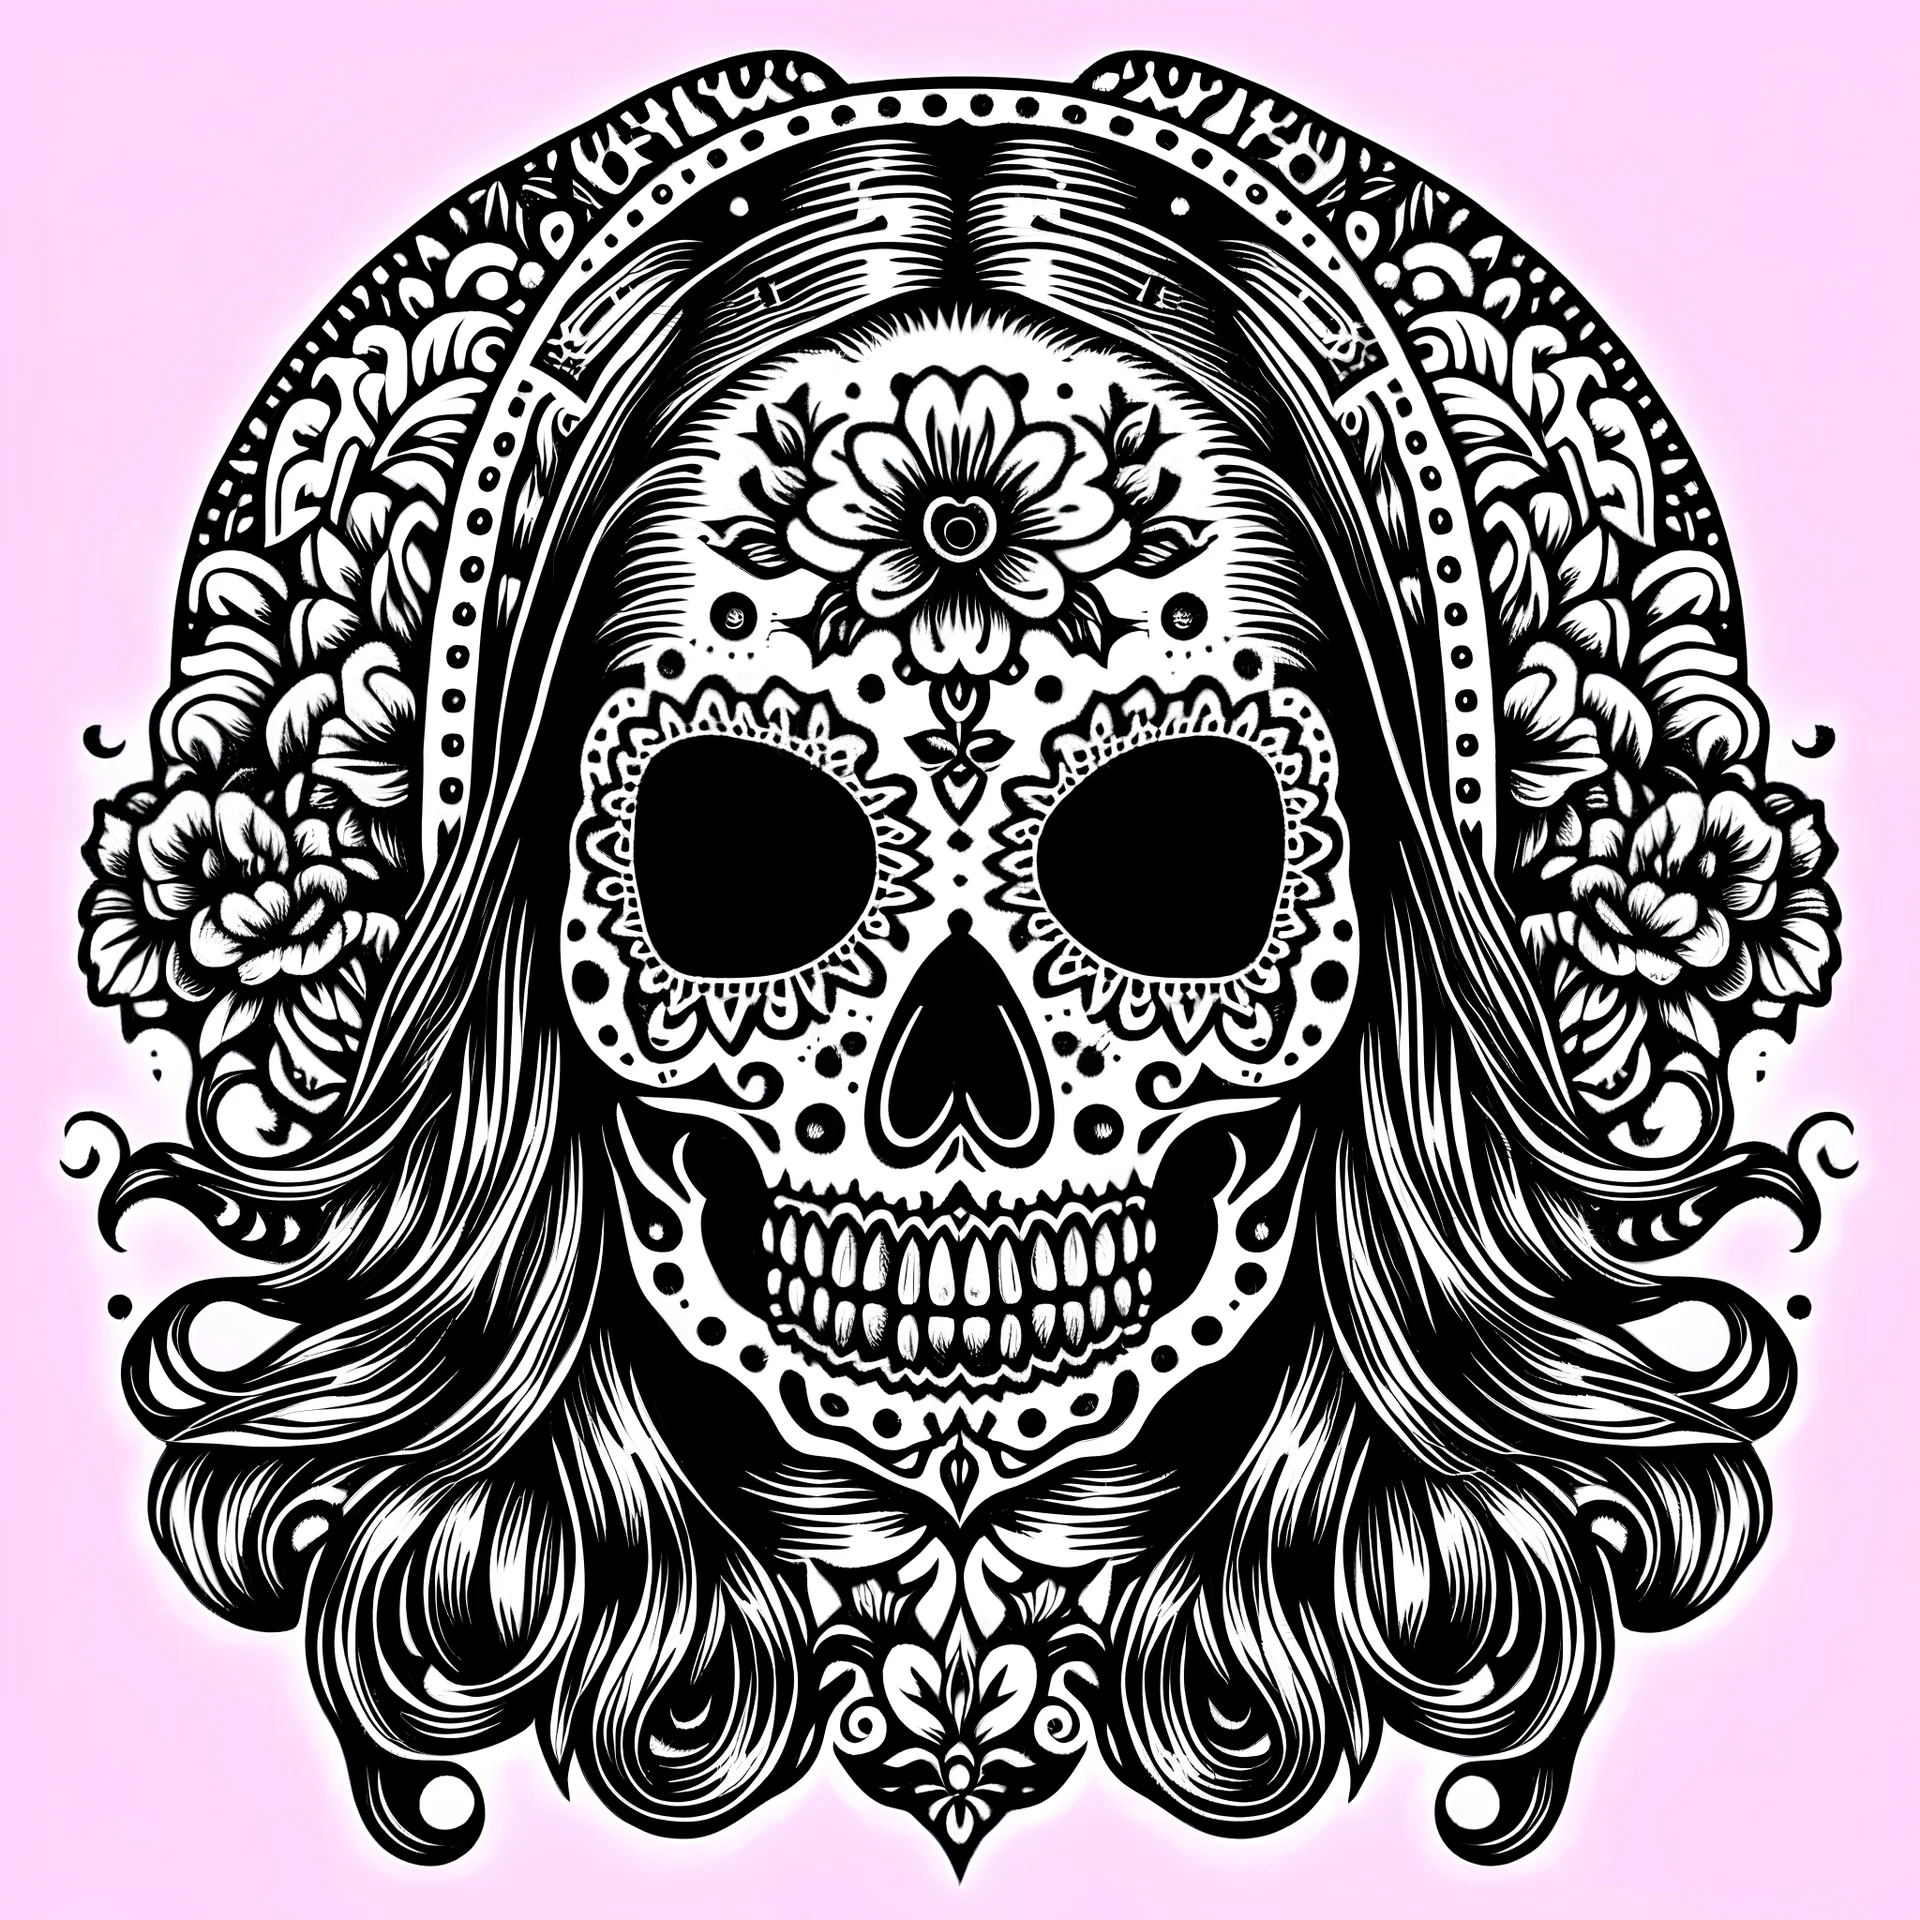 A simple black and white line of dia de muerte in old school tattoo style